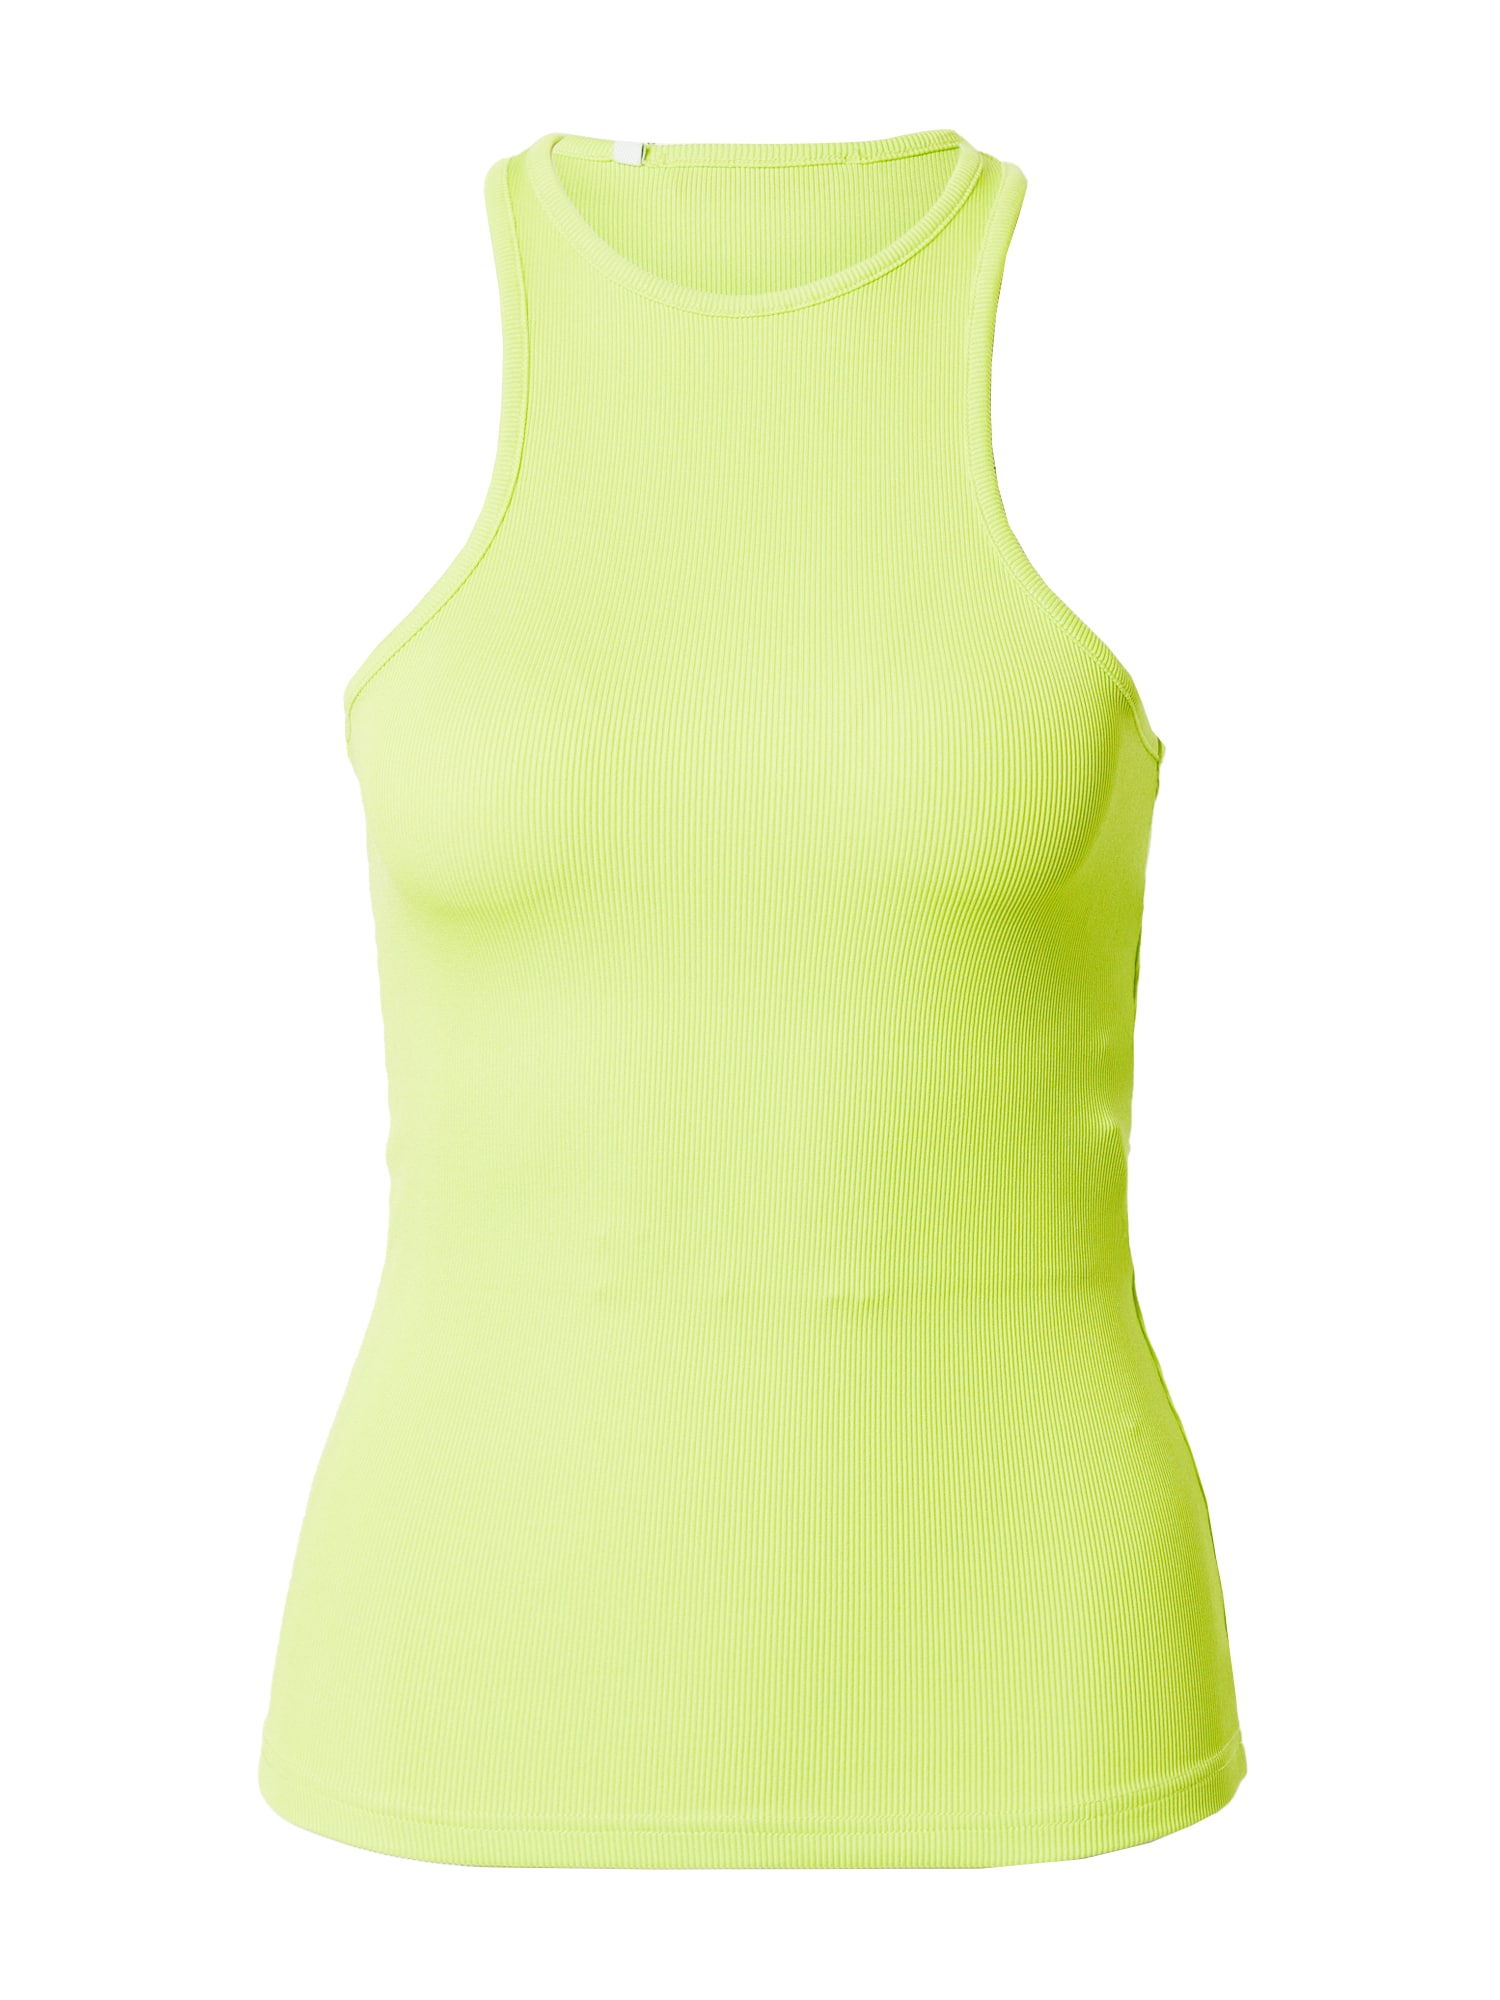 Oval Square Top 'Party'  limeta